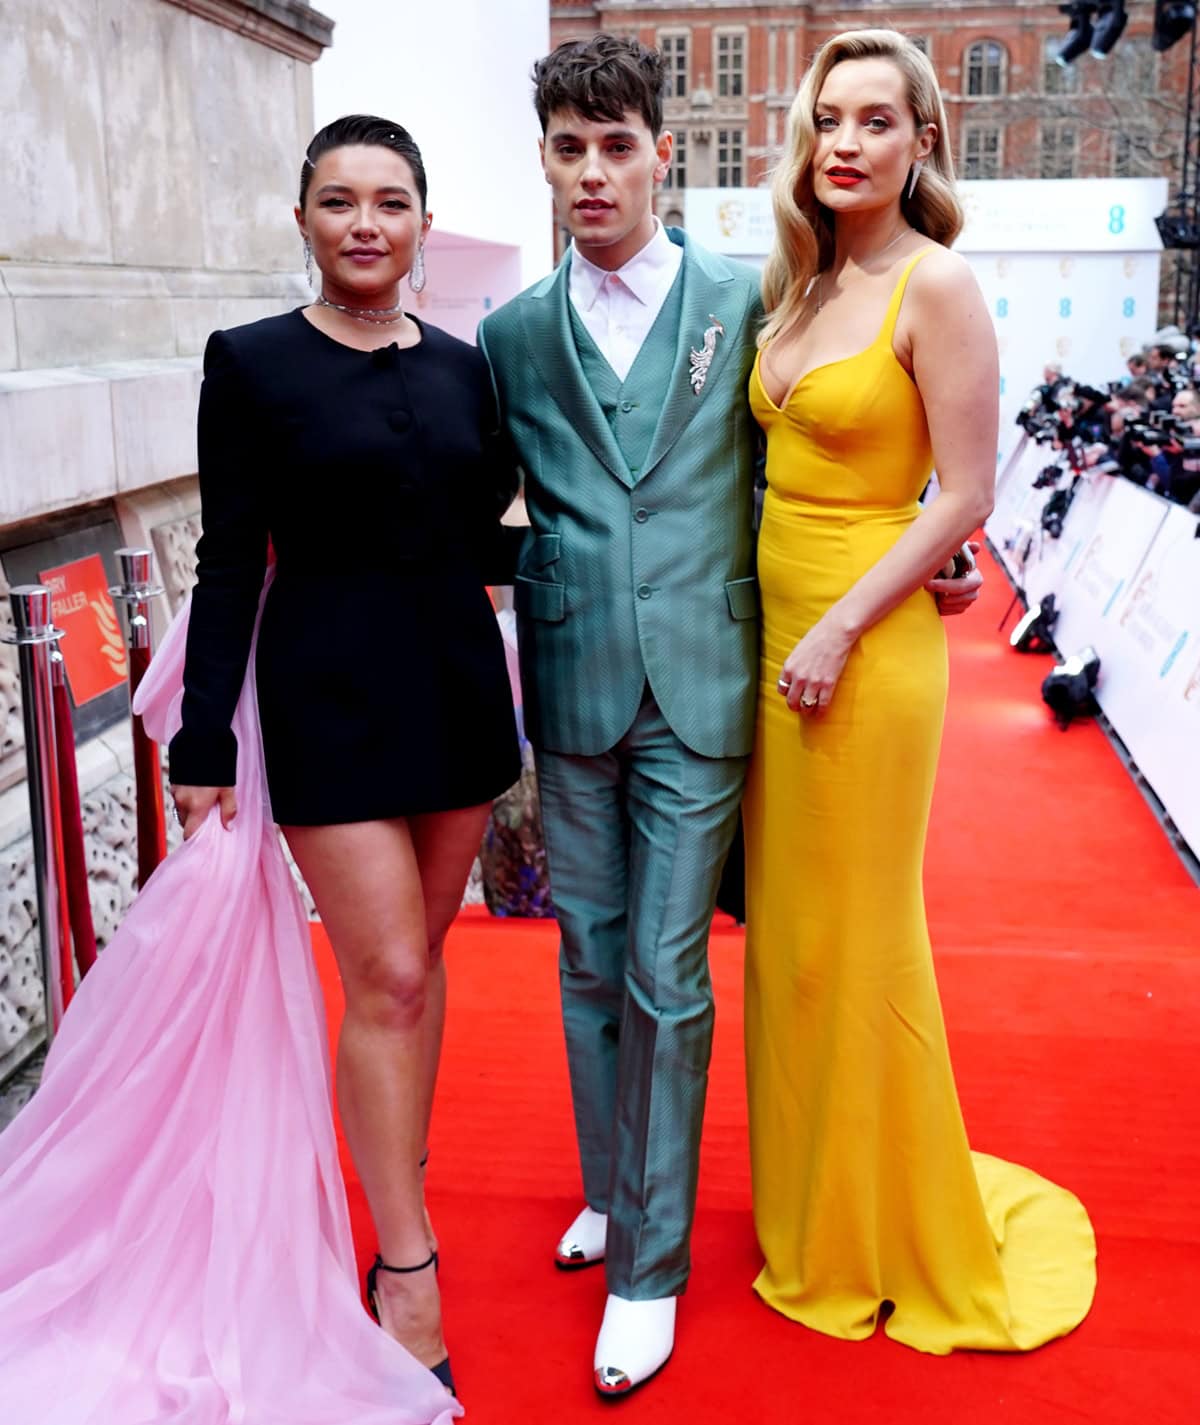 Laura Whitmore stands out with her heels on the red carpet, closely matching Max Harwood's height, while towering over Florence Pugh at the British Academy Film Awards 2022